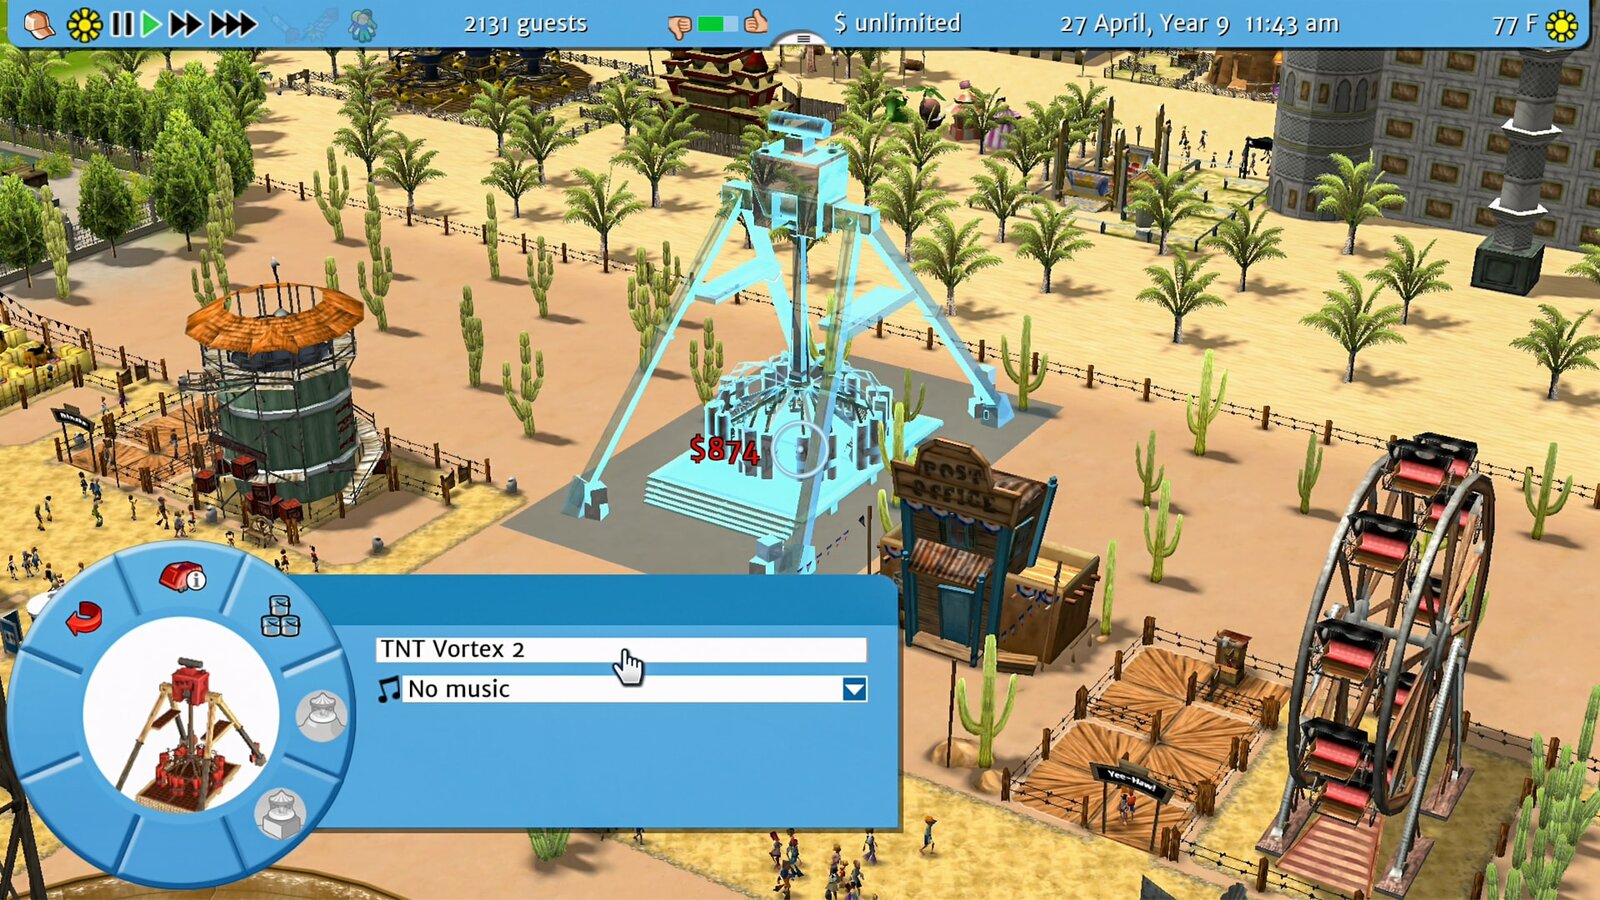 RollerCoaster Tycoon 3 - Complete Edition